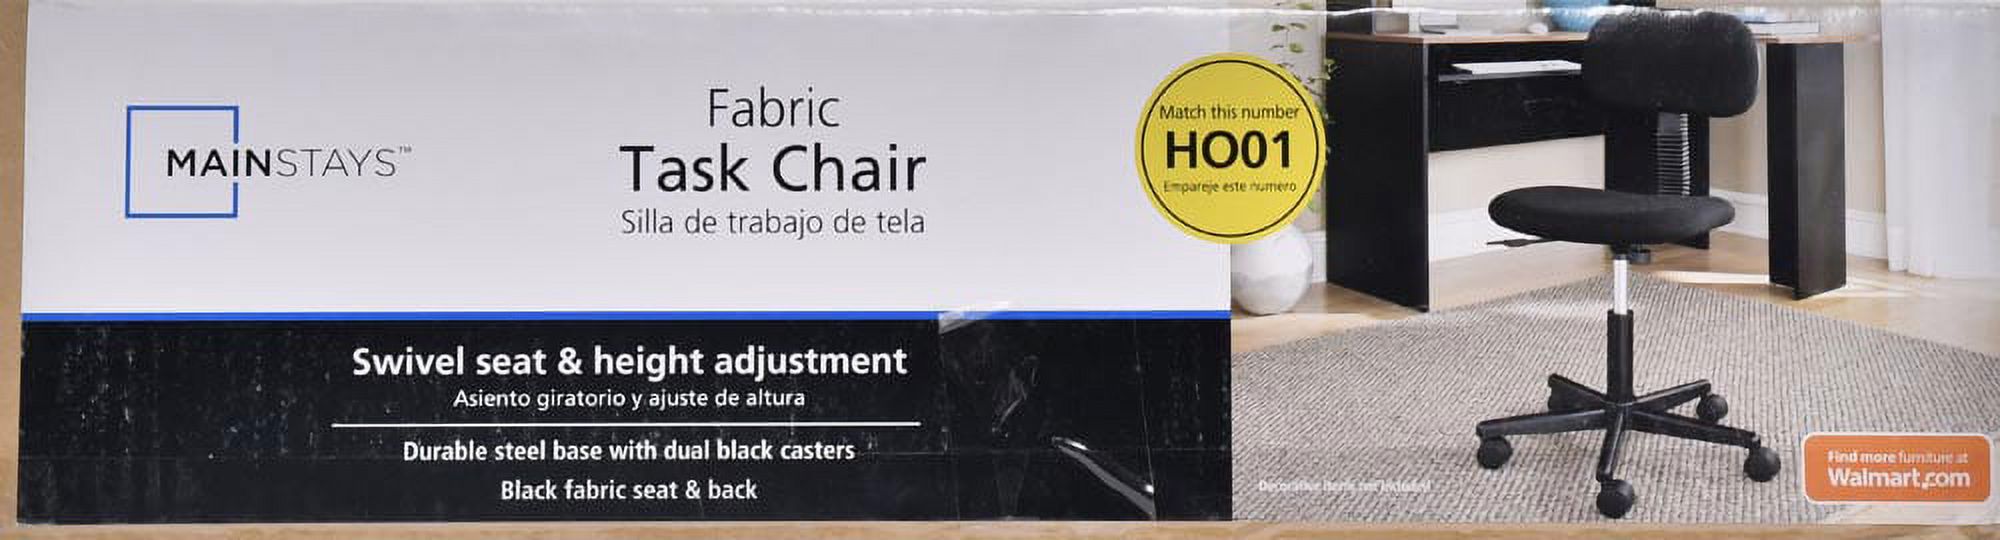 Mainstays Fabric Task Chair, Black - image 4 of 4